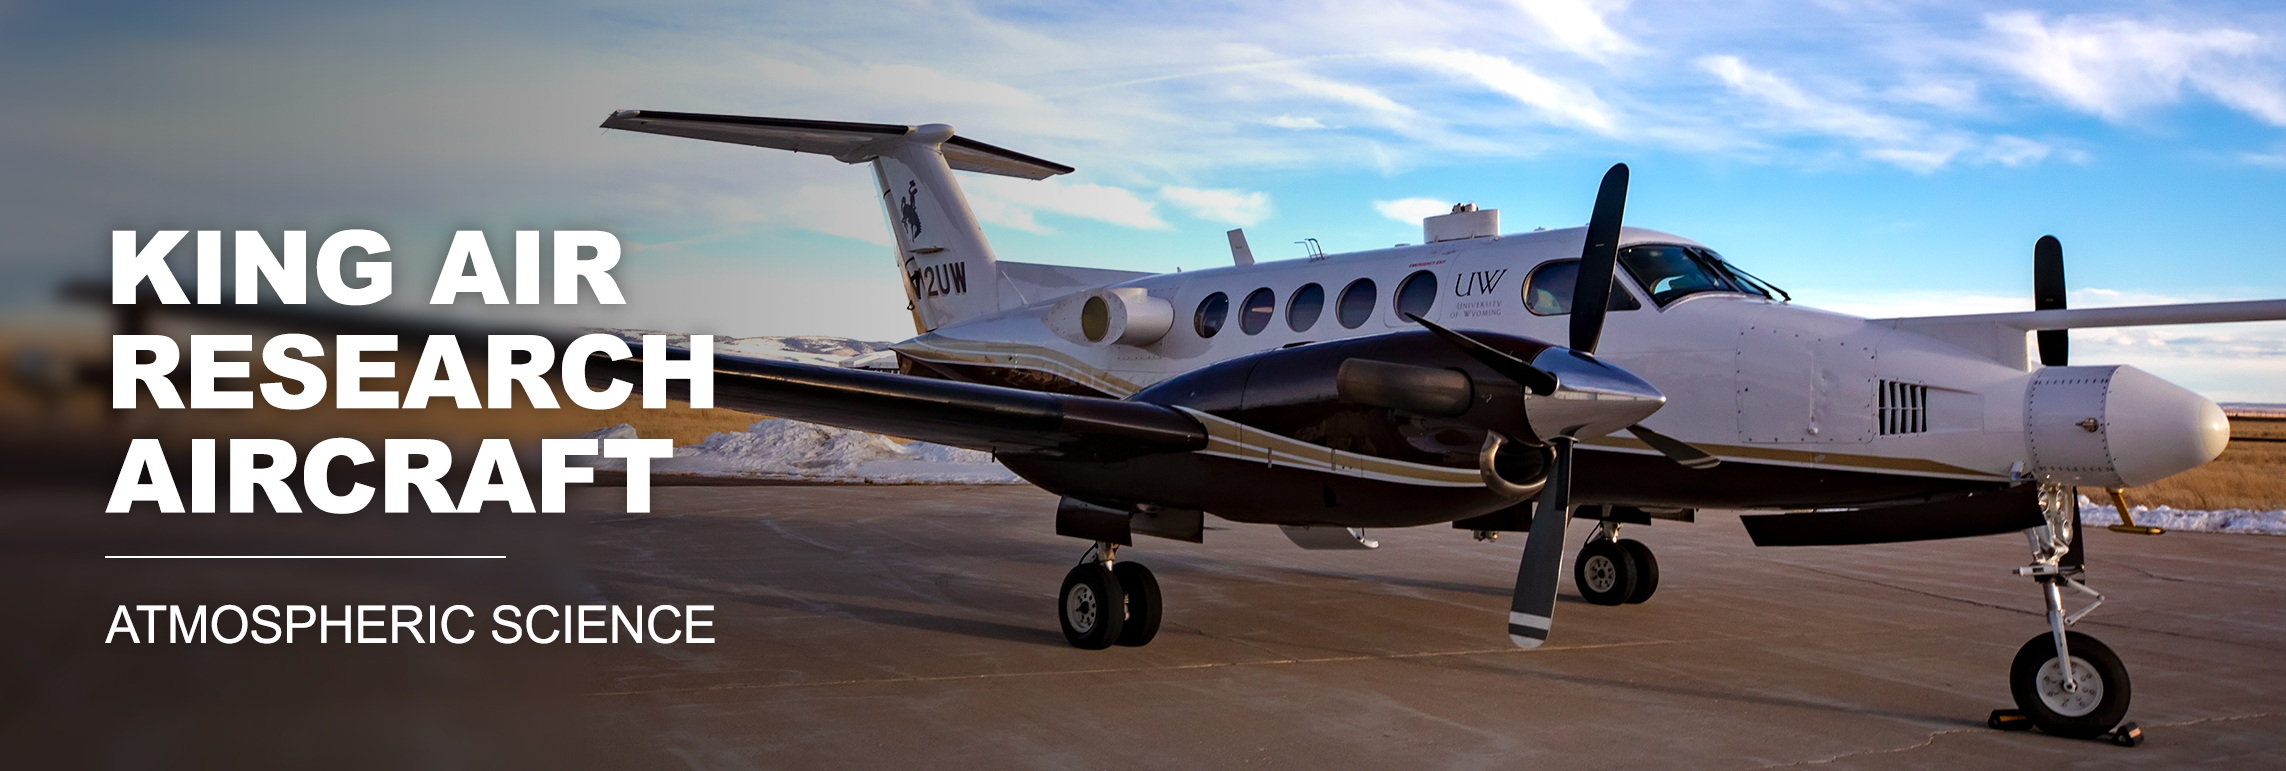 King Air airplane in background with King Air Research Aircraft: Atmospheric Science